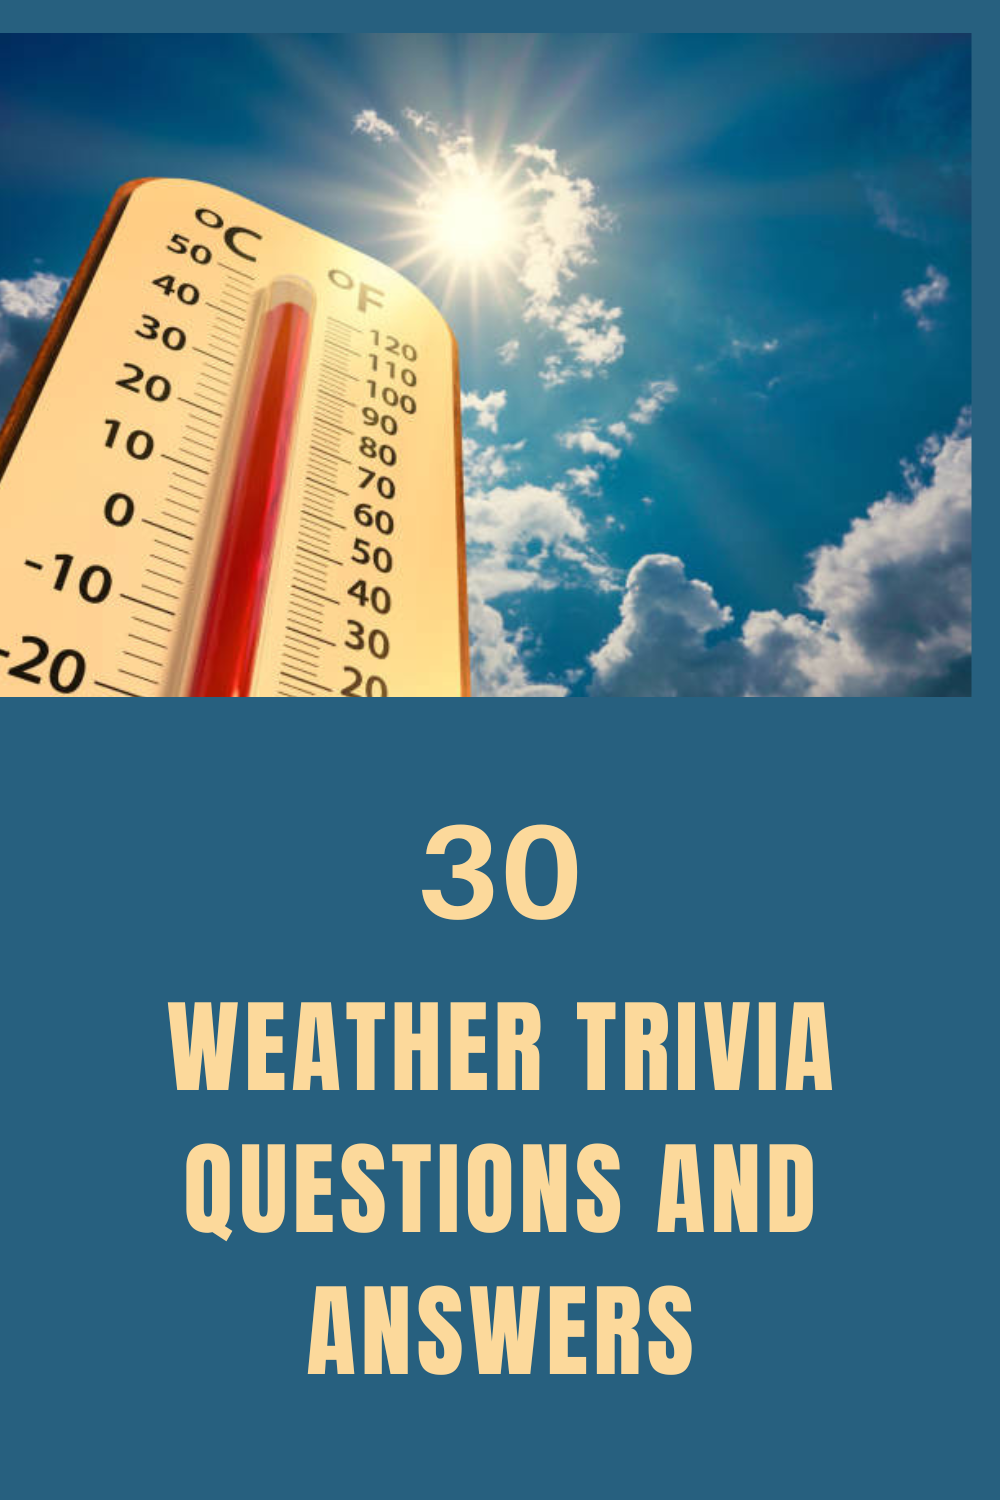 30 Weather Trivia Questions and Answers